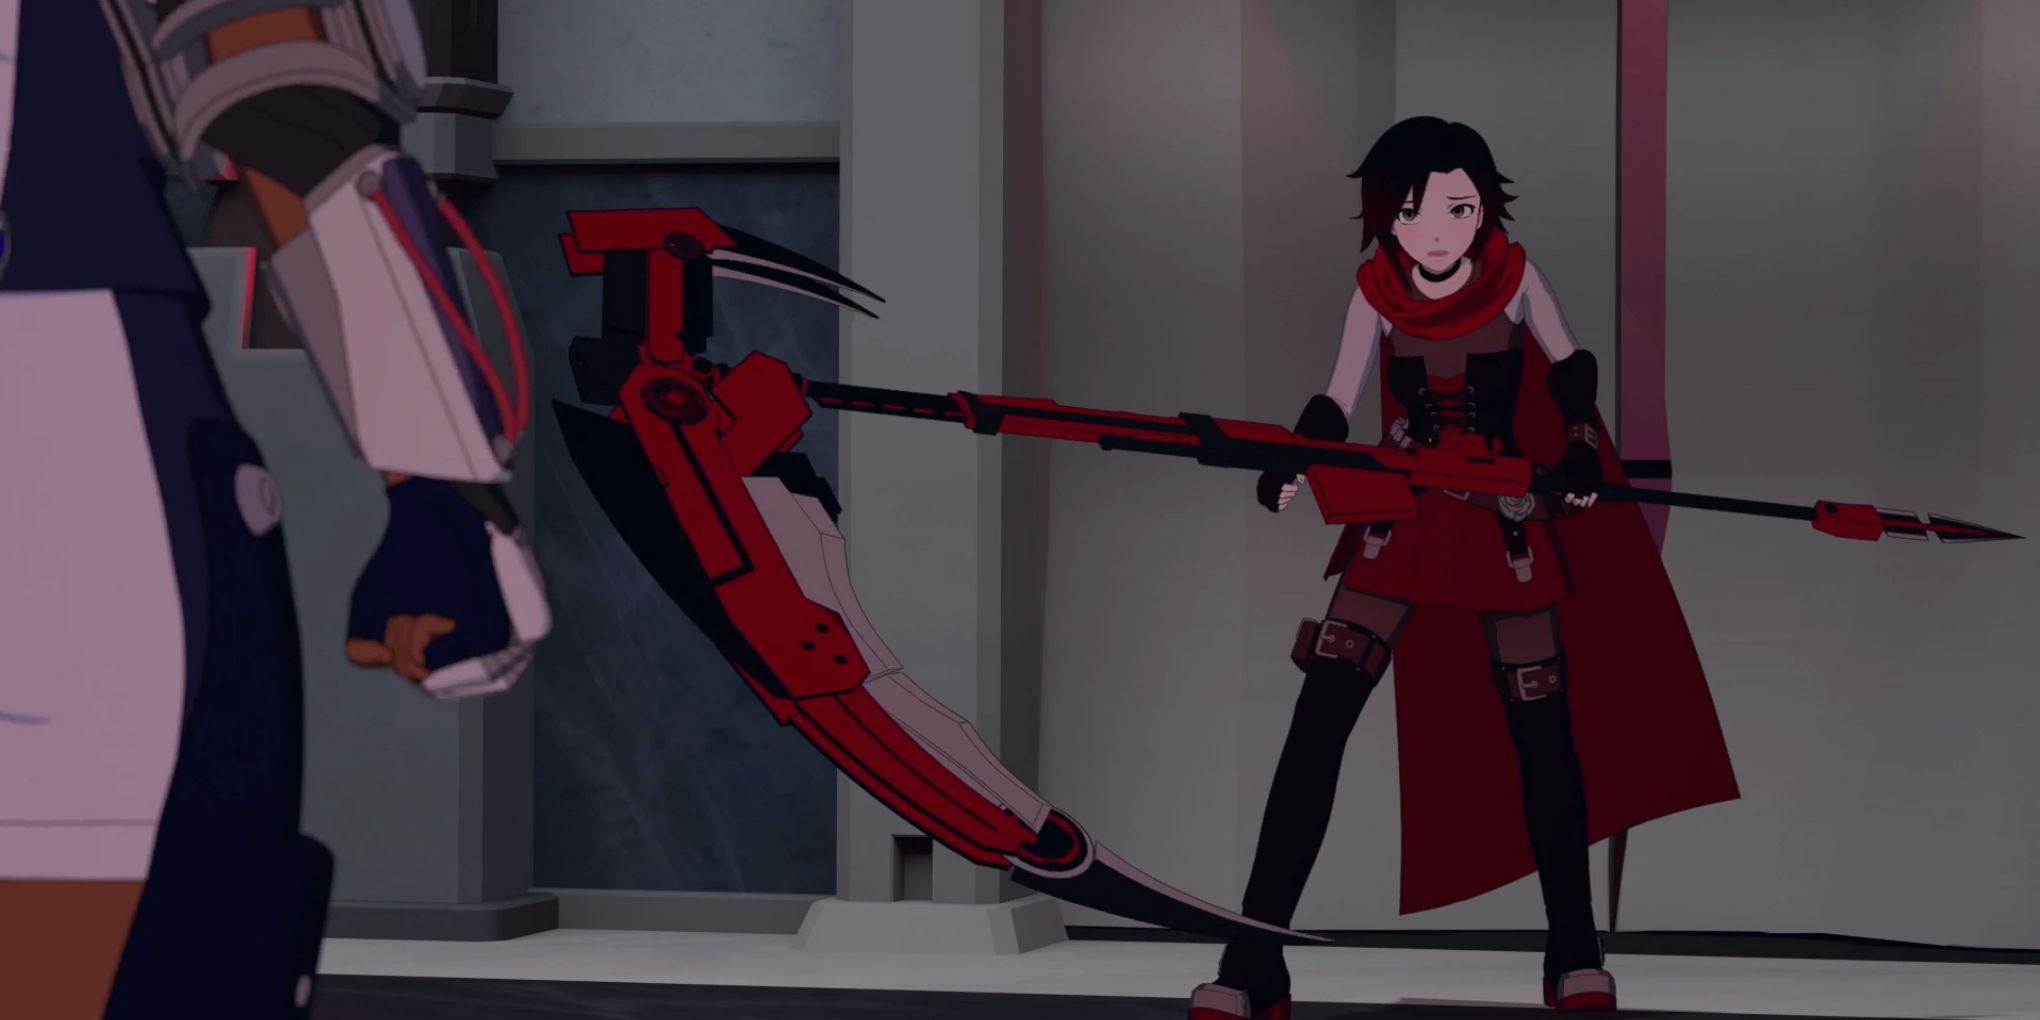 Ruby And Crescent Rose VS Harriet In RWBY Vol 7